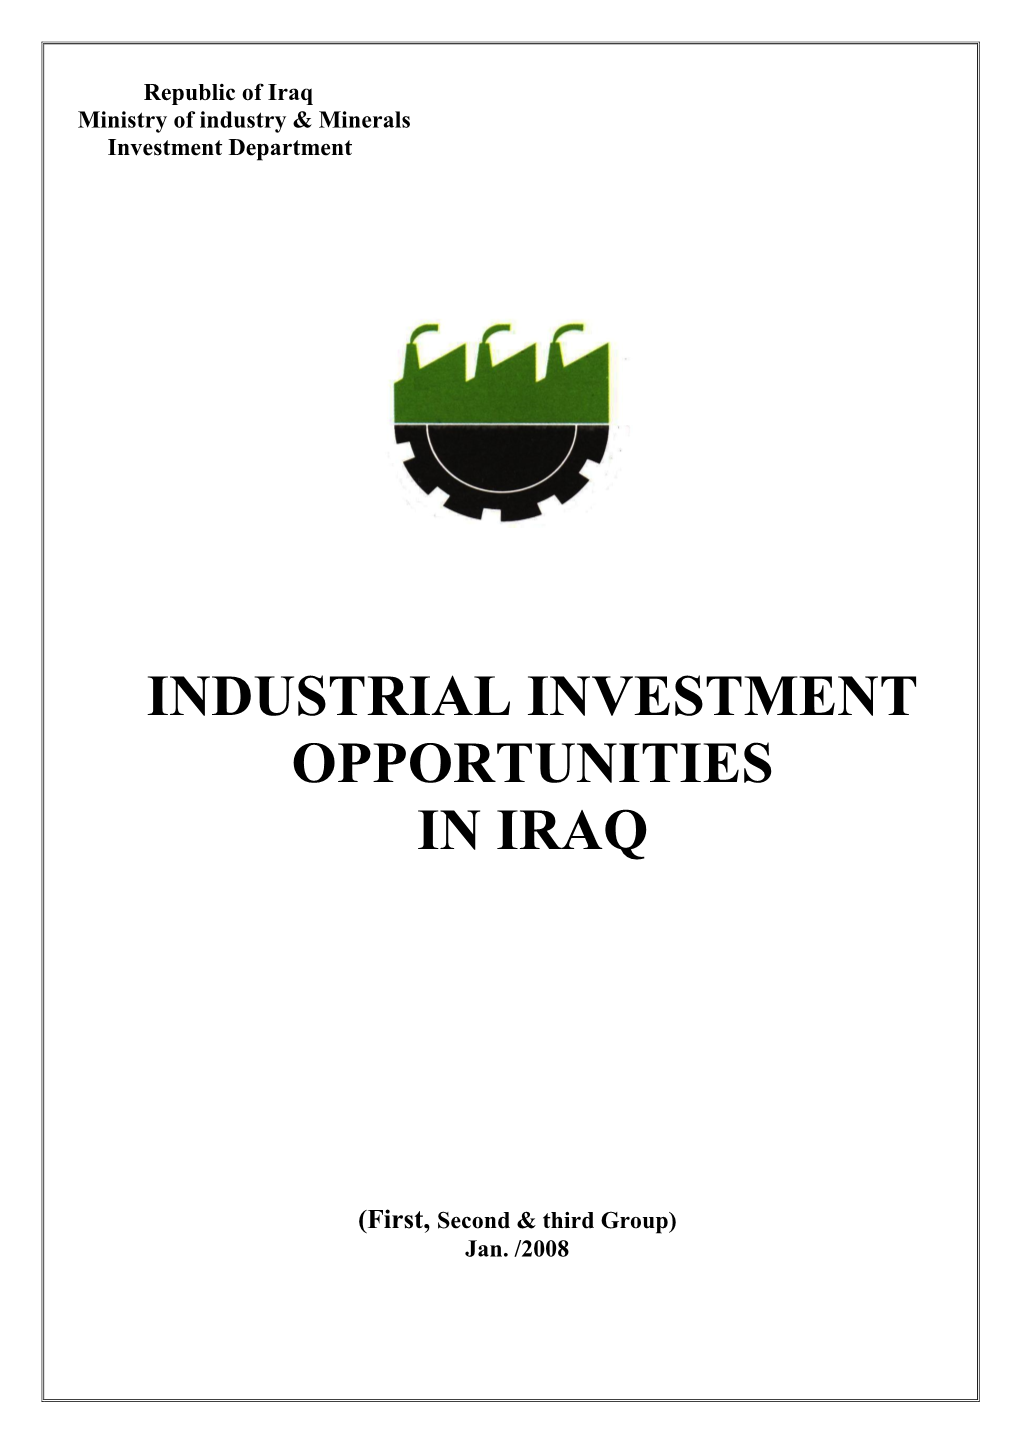 Industrial Investment Opportunities in Iraq